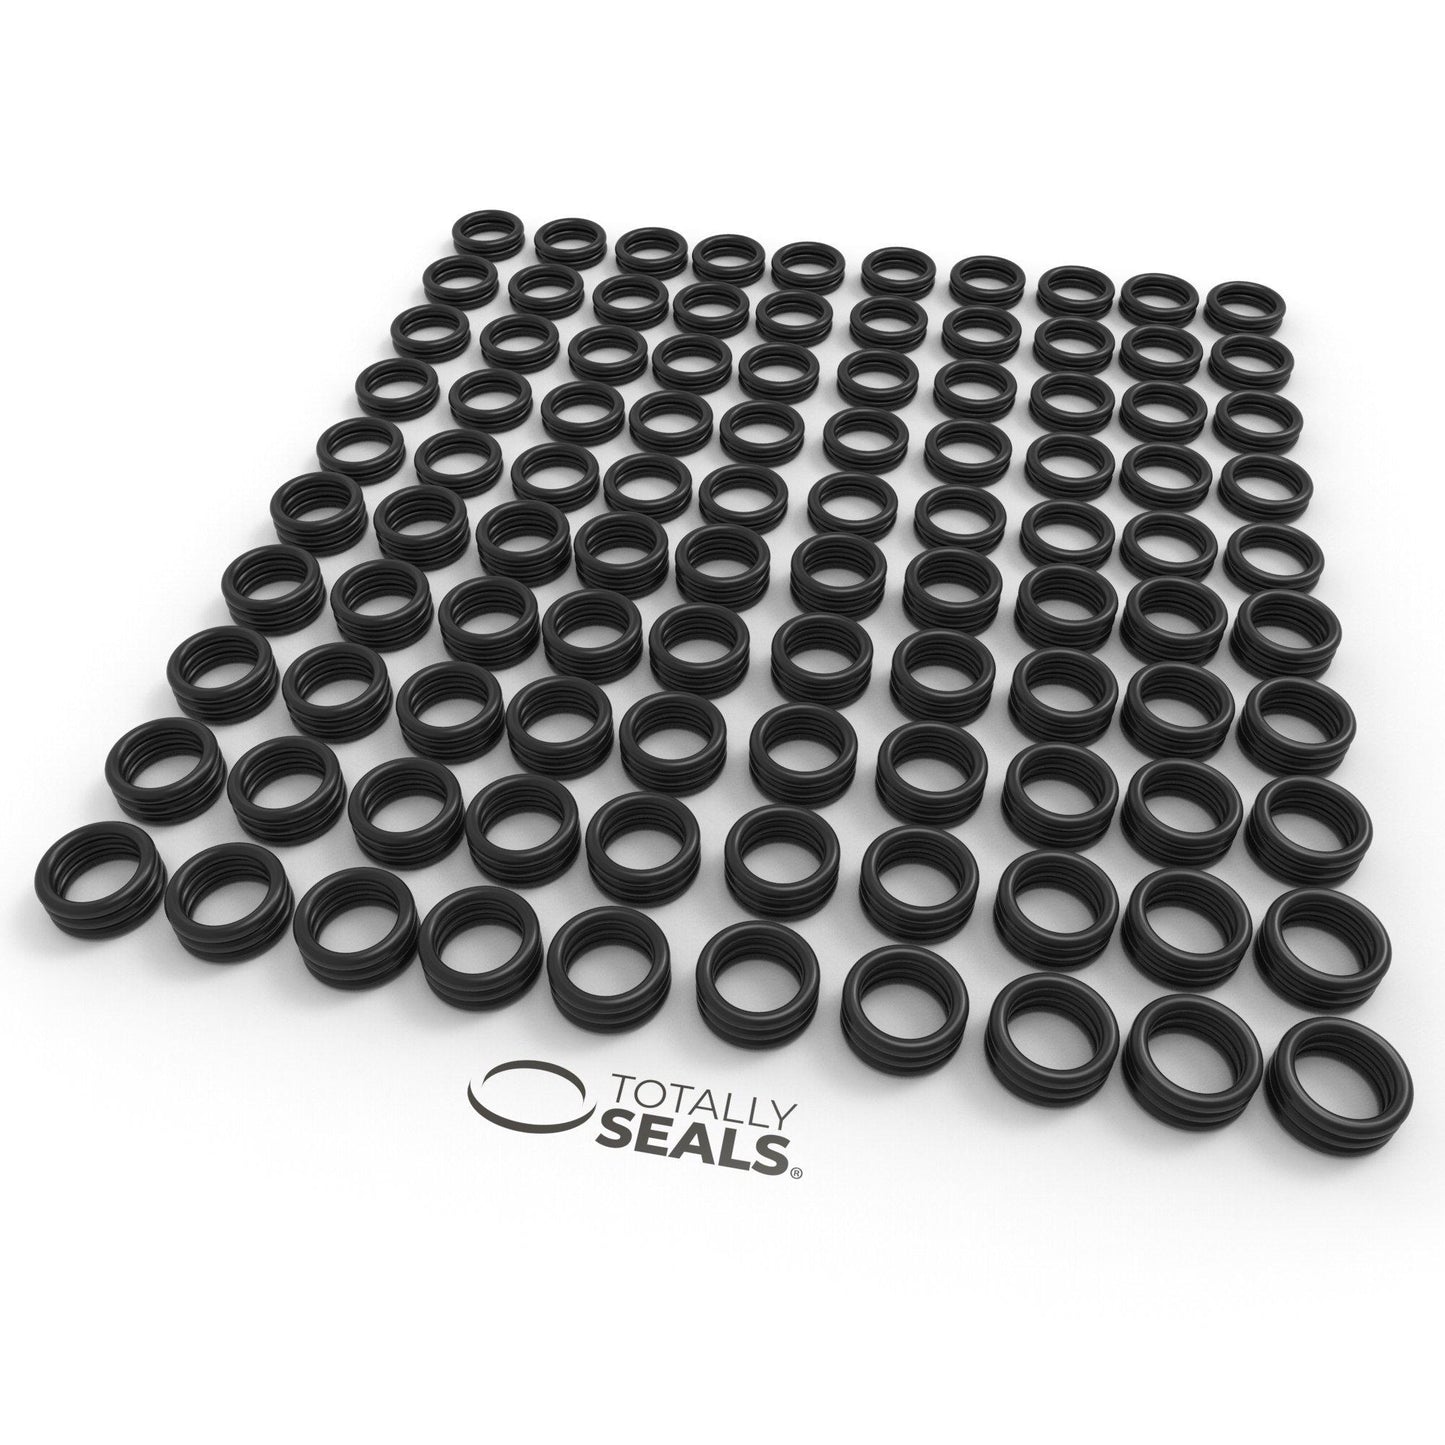 26mm x 1.5mm (29mm OD) Nitrile O-Rings - Totally Seals®